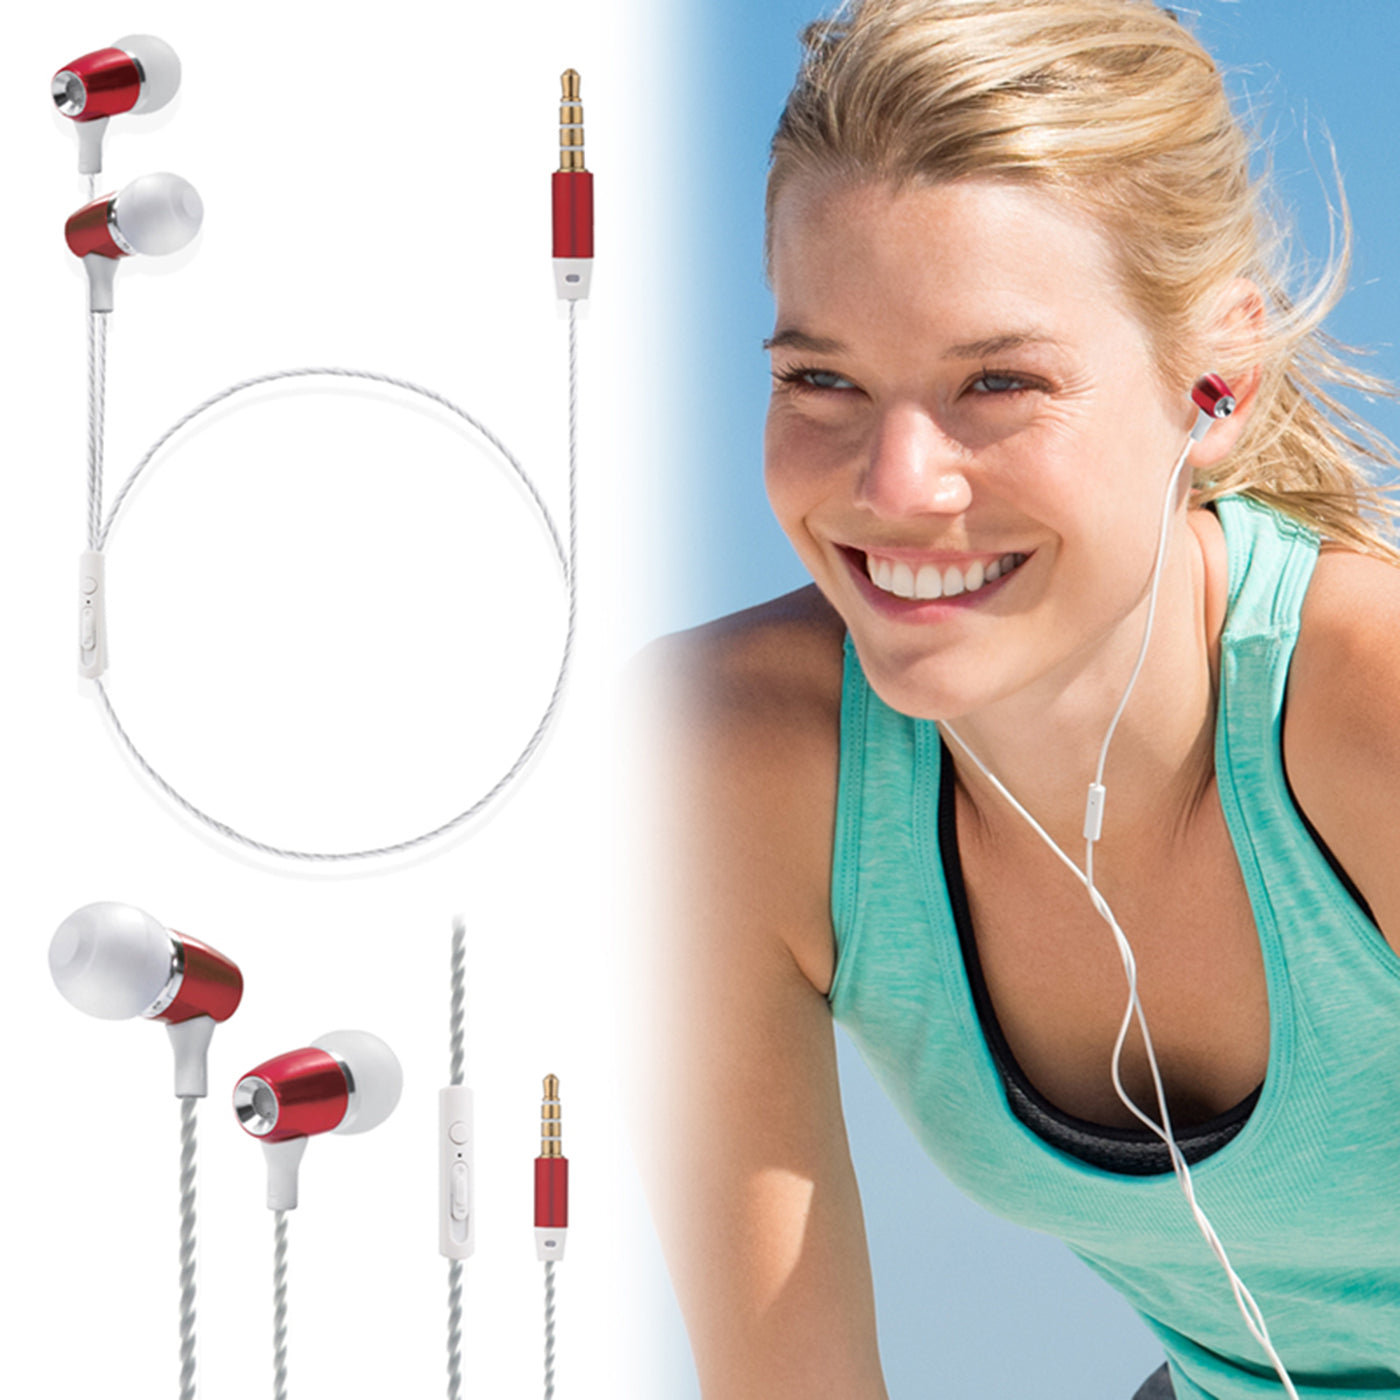 H350 Wired In-Ear Bass Headphones Headsets Earbuds With Microphone Stereo Earphones In Red